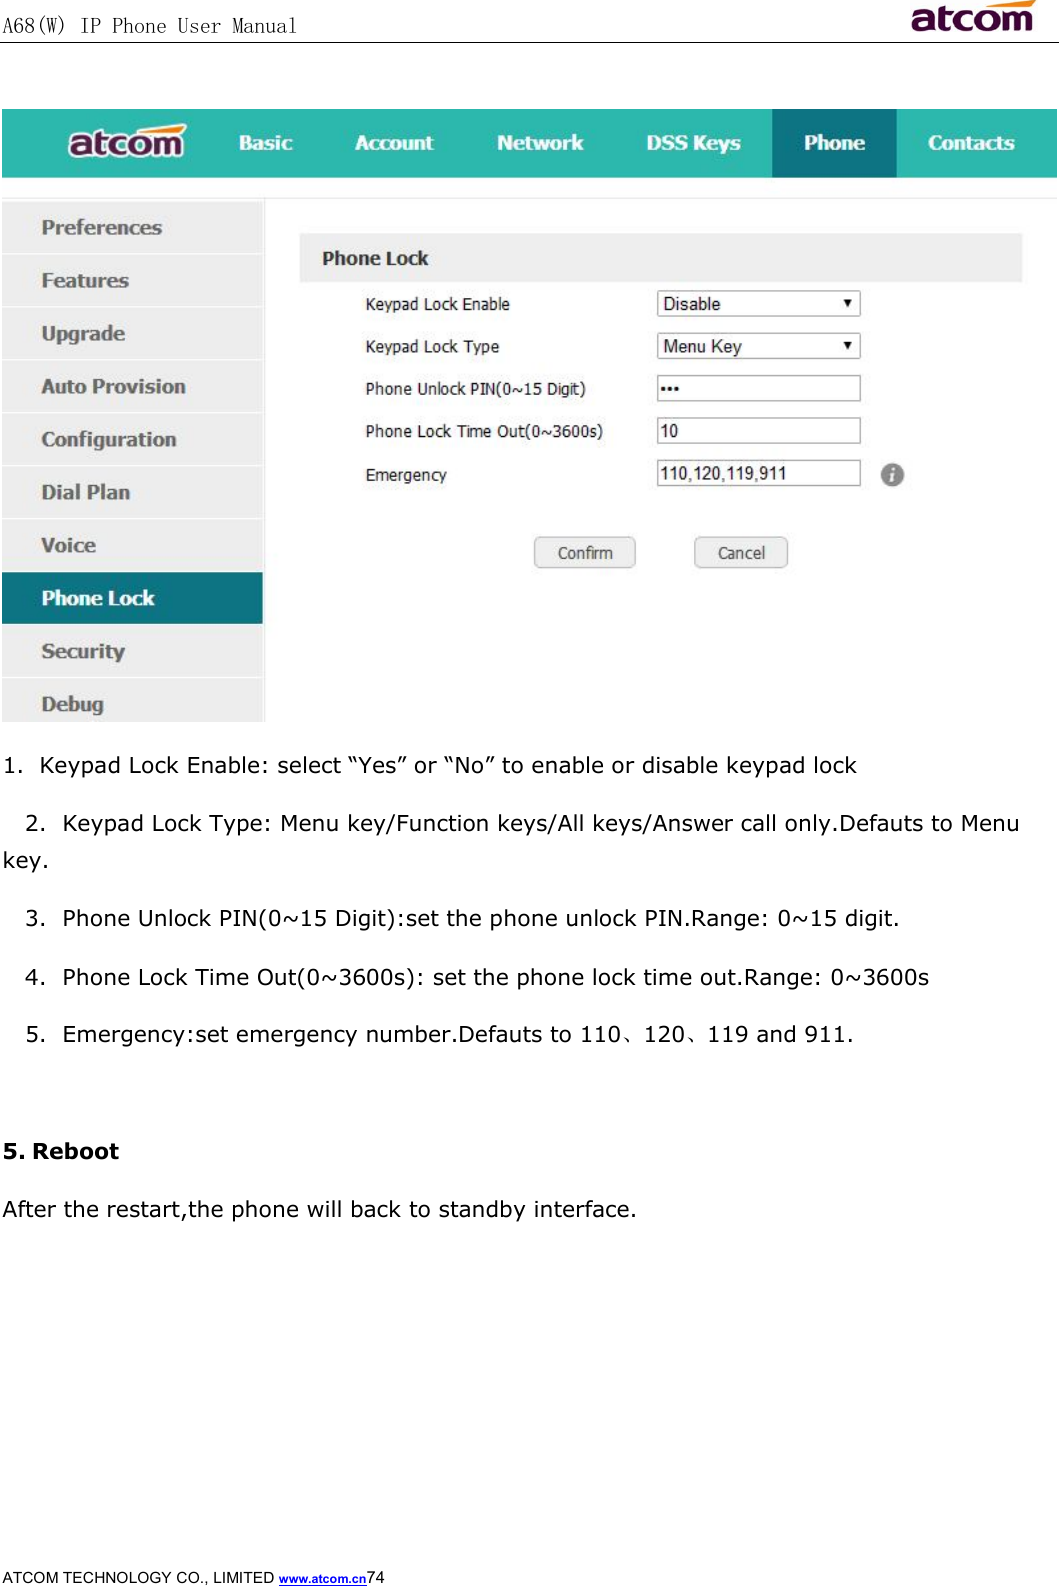 A68(W) IP Phone User Manual                                                           ATCOM TECHNOLOGY CO., LIMITED www.atcom.cn74    1.  Keypad Lock Enable: select “Yes” or “No” to enable or disable keypad lock    2.  Keypad Lock Type: Menu key/Function keys/All keys/Answer call only.Defauts to Menu key.    3.  Phone Unlock PIN(0~15 Digit):set the phone unlock PIN.Range: 0~15 digit.    4.  Phone Lock Time Out(0~3600s): set the phone lock time out.Range: 0~3600s    5.  Emergency:set emergency number.Defauts to 110、120、119 and 911.  5. Reboot After the restart,the phone will back to standby interface. 